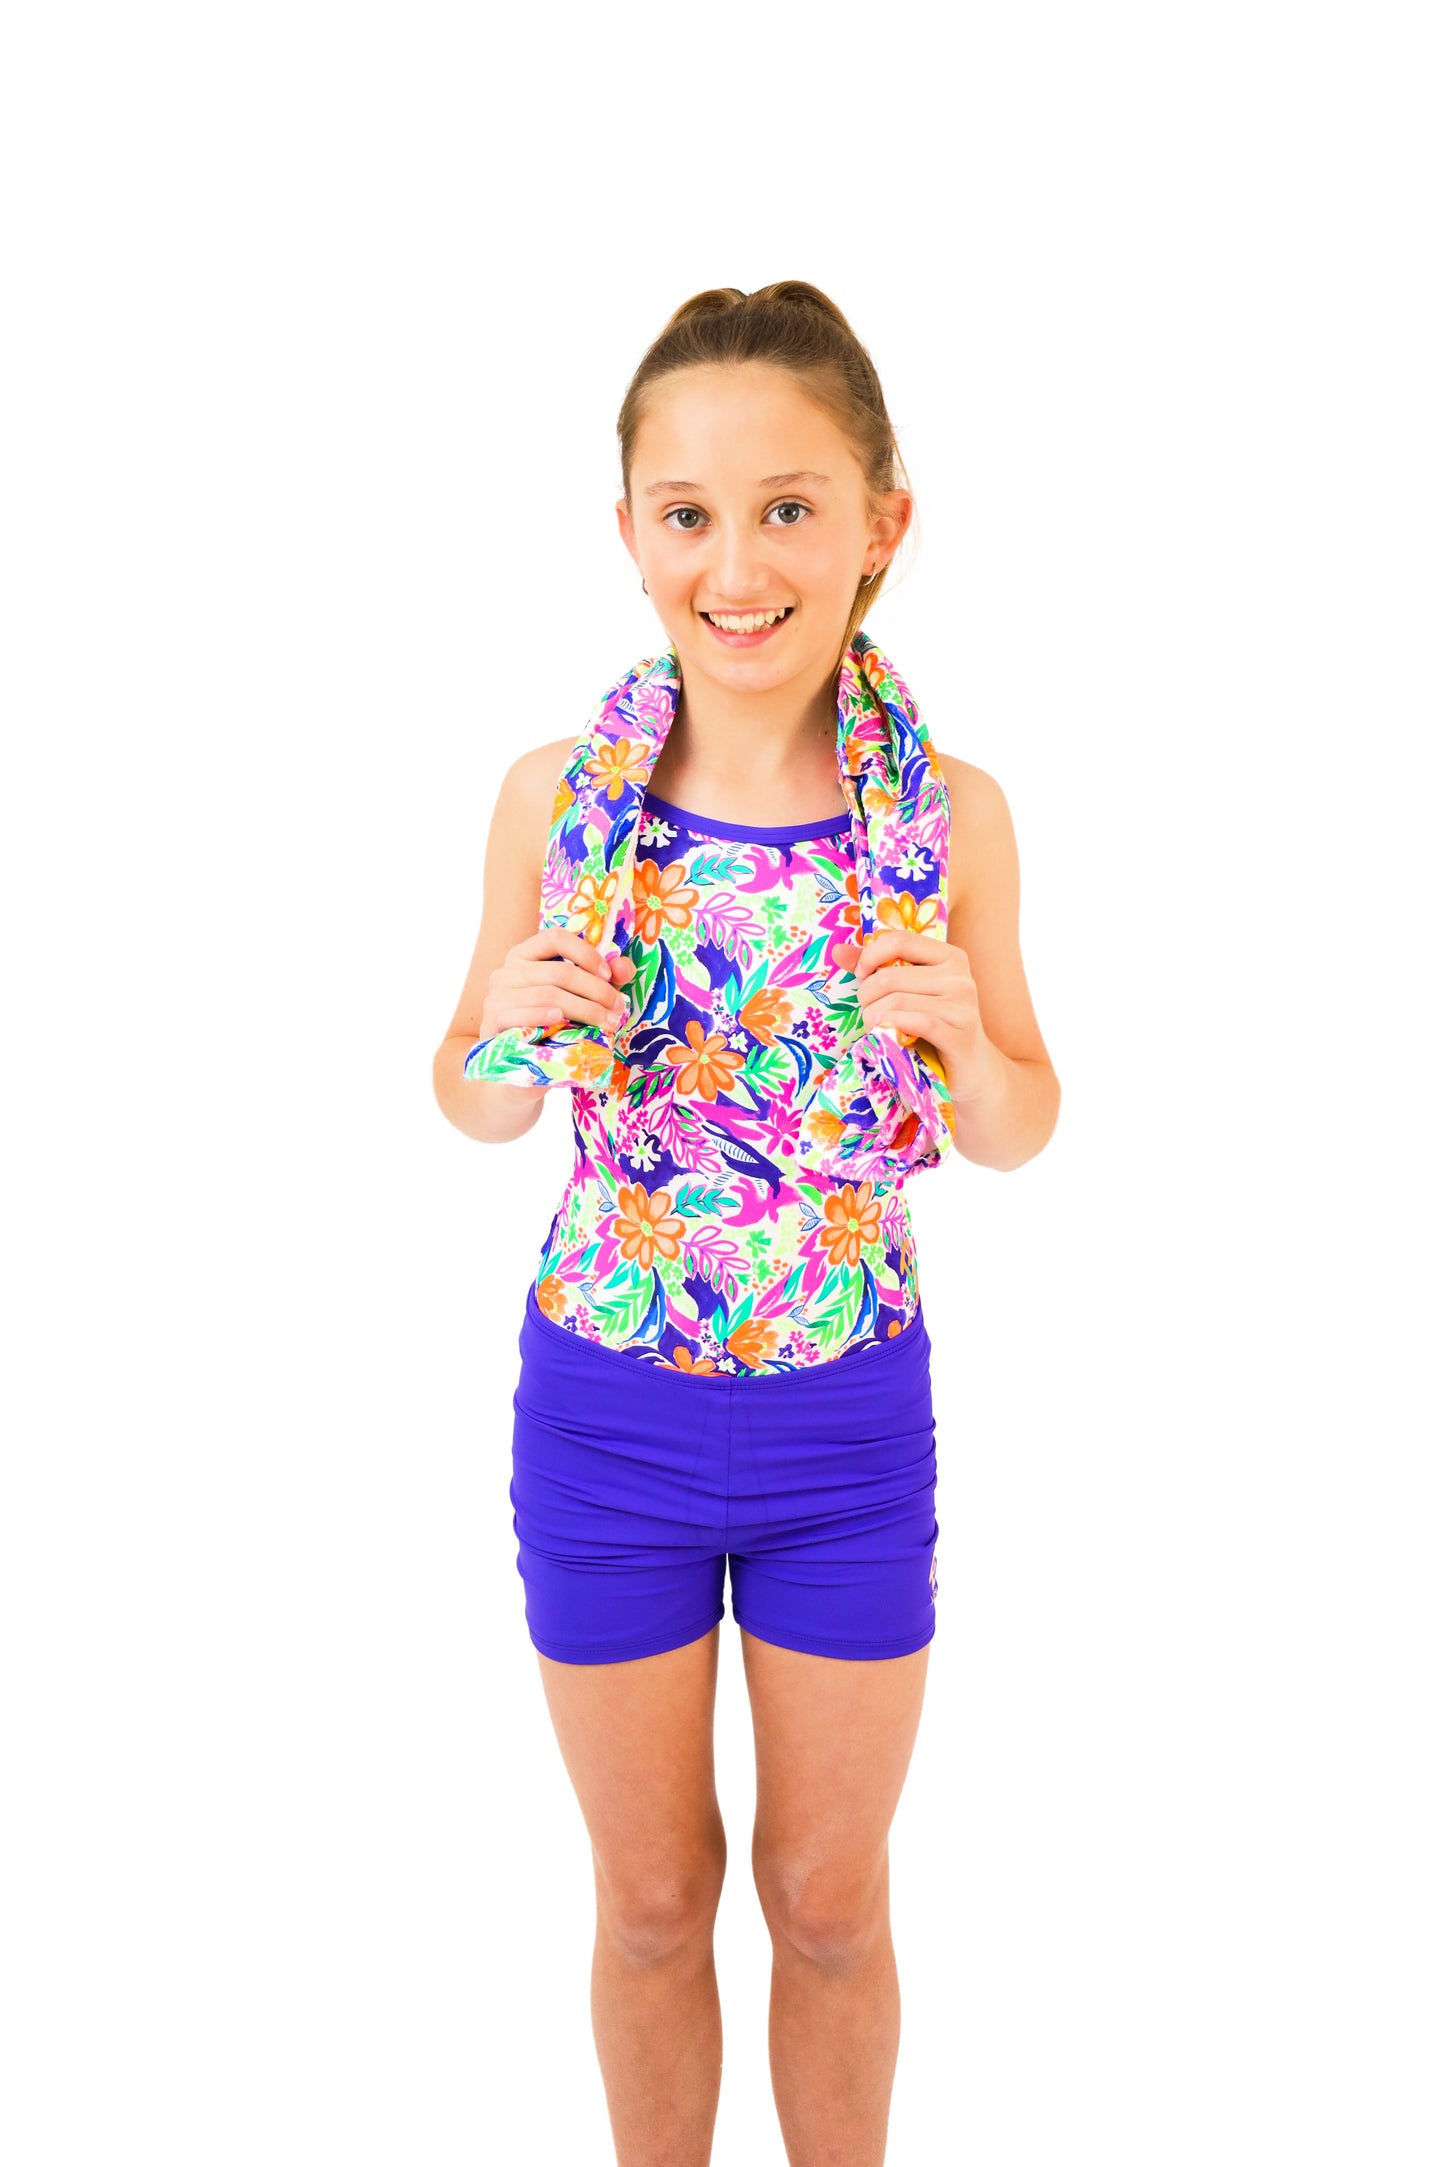 Tropical Print Sweat Towel for Active and Sporty Girls. Gymnastics Wear, Activewear for Girls, Swimwear for girls. Leotards, Swimwear, Swimming, Sports Bra, Girls Clothing by B you active, B you leotards, B you swimwear. 